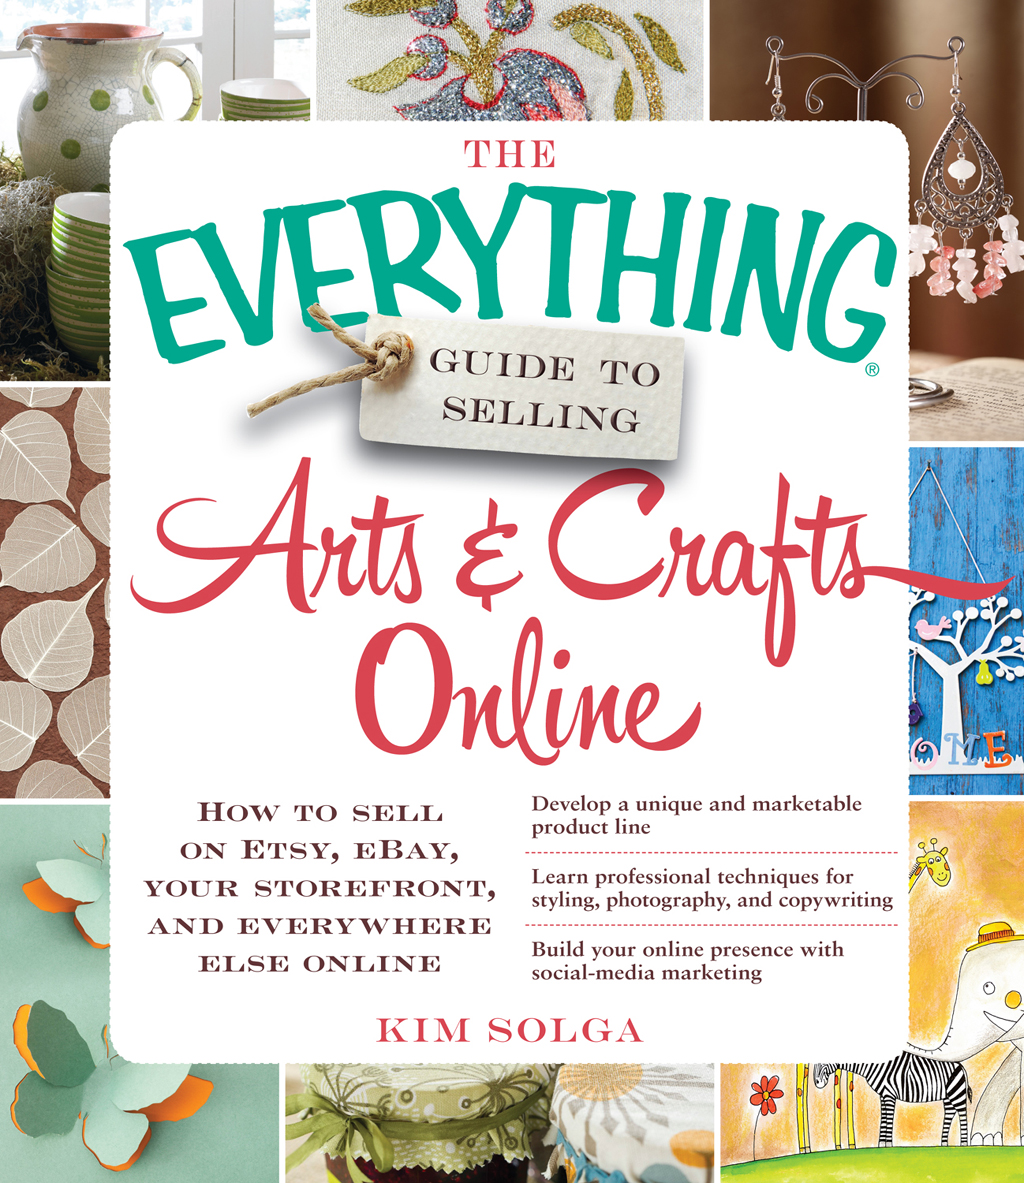 THE GUIDE TO SELLING ARTS CRAFTS ONLINE How to sell on Etsy - photo 1